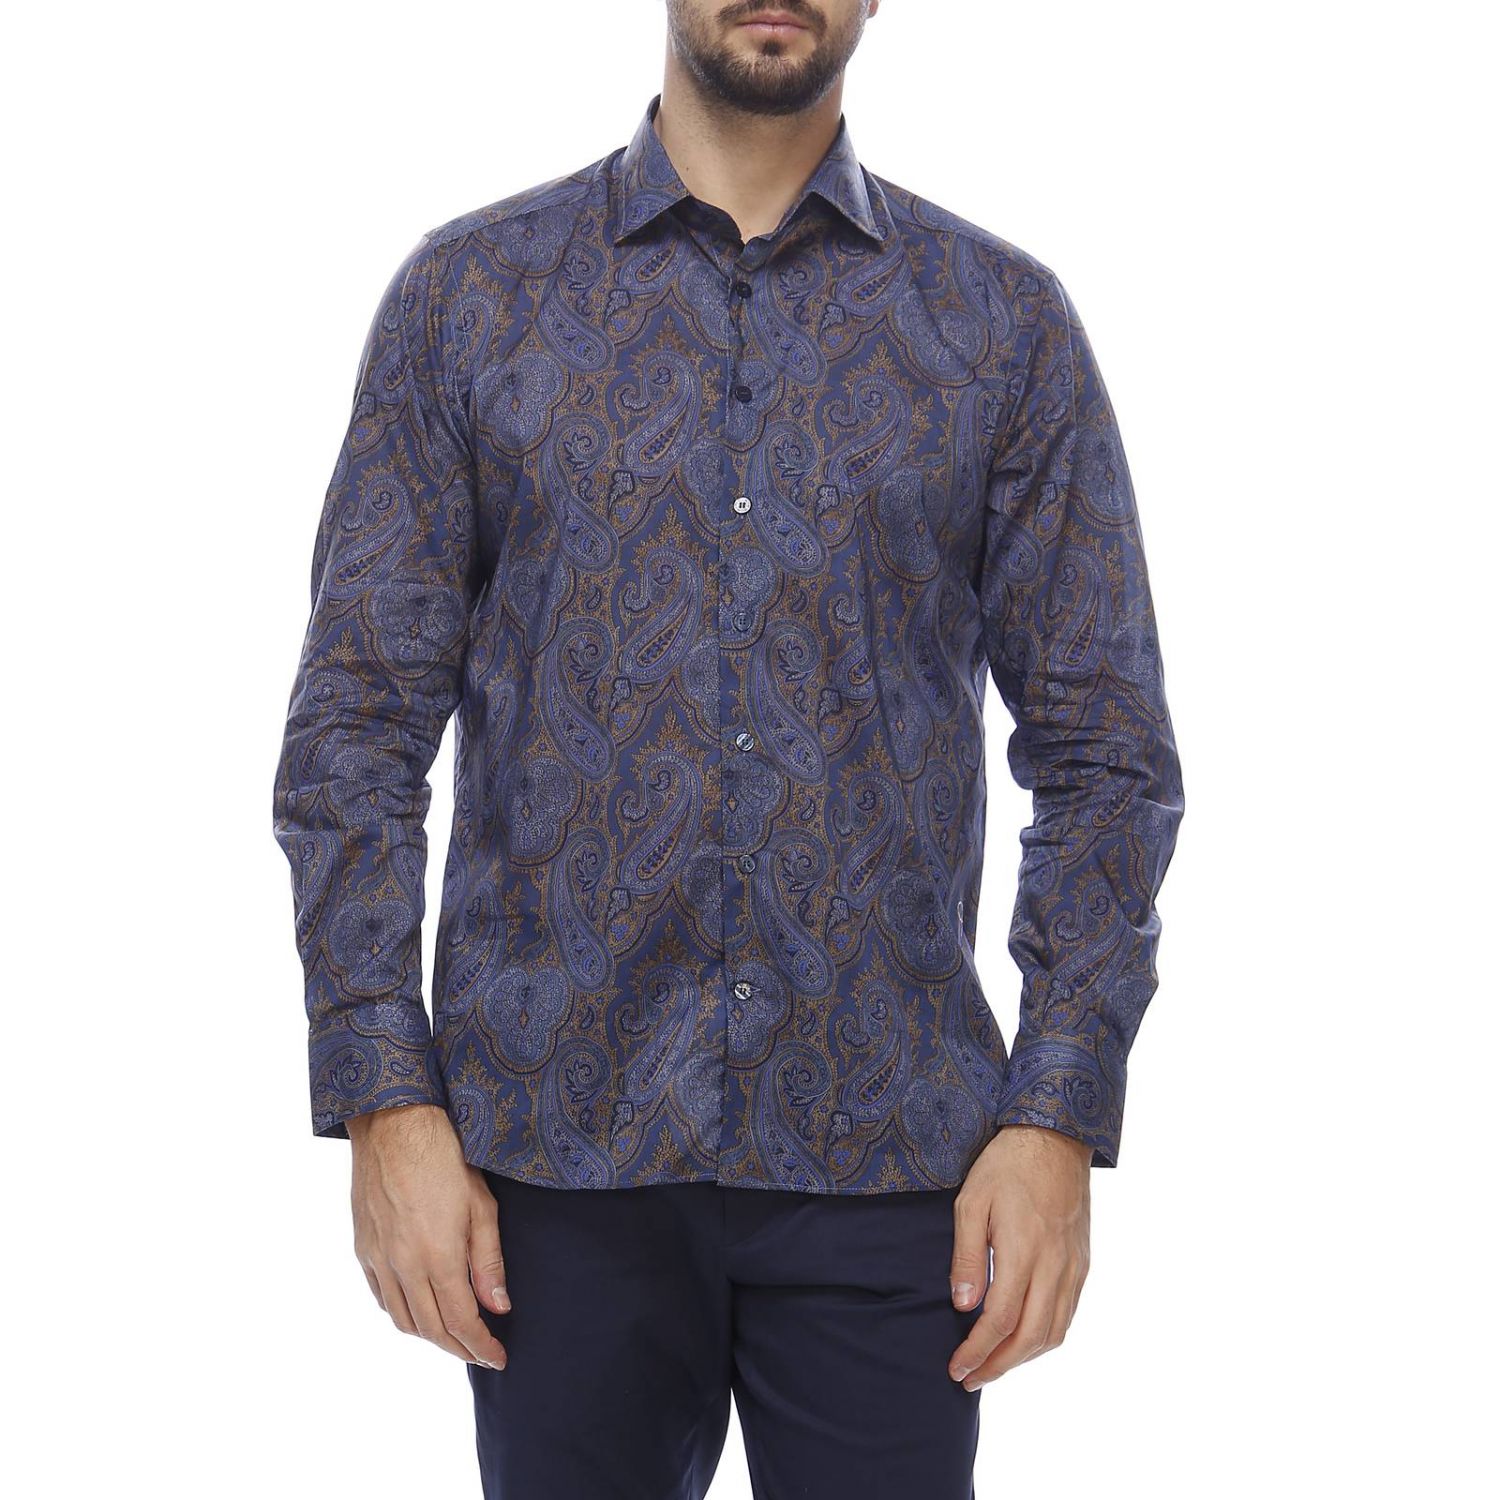 Etro Outlet: shirt for man - Blue | Etro shirt 12908 4731 online on ...